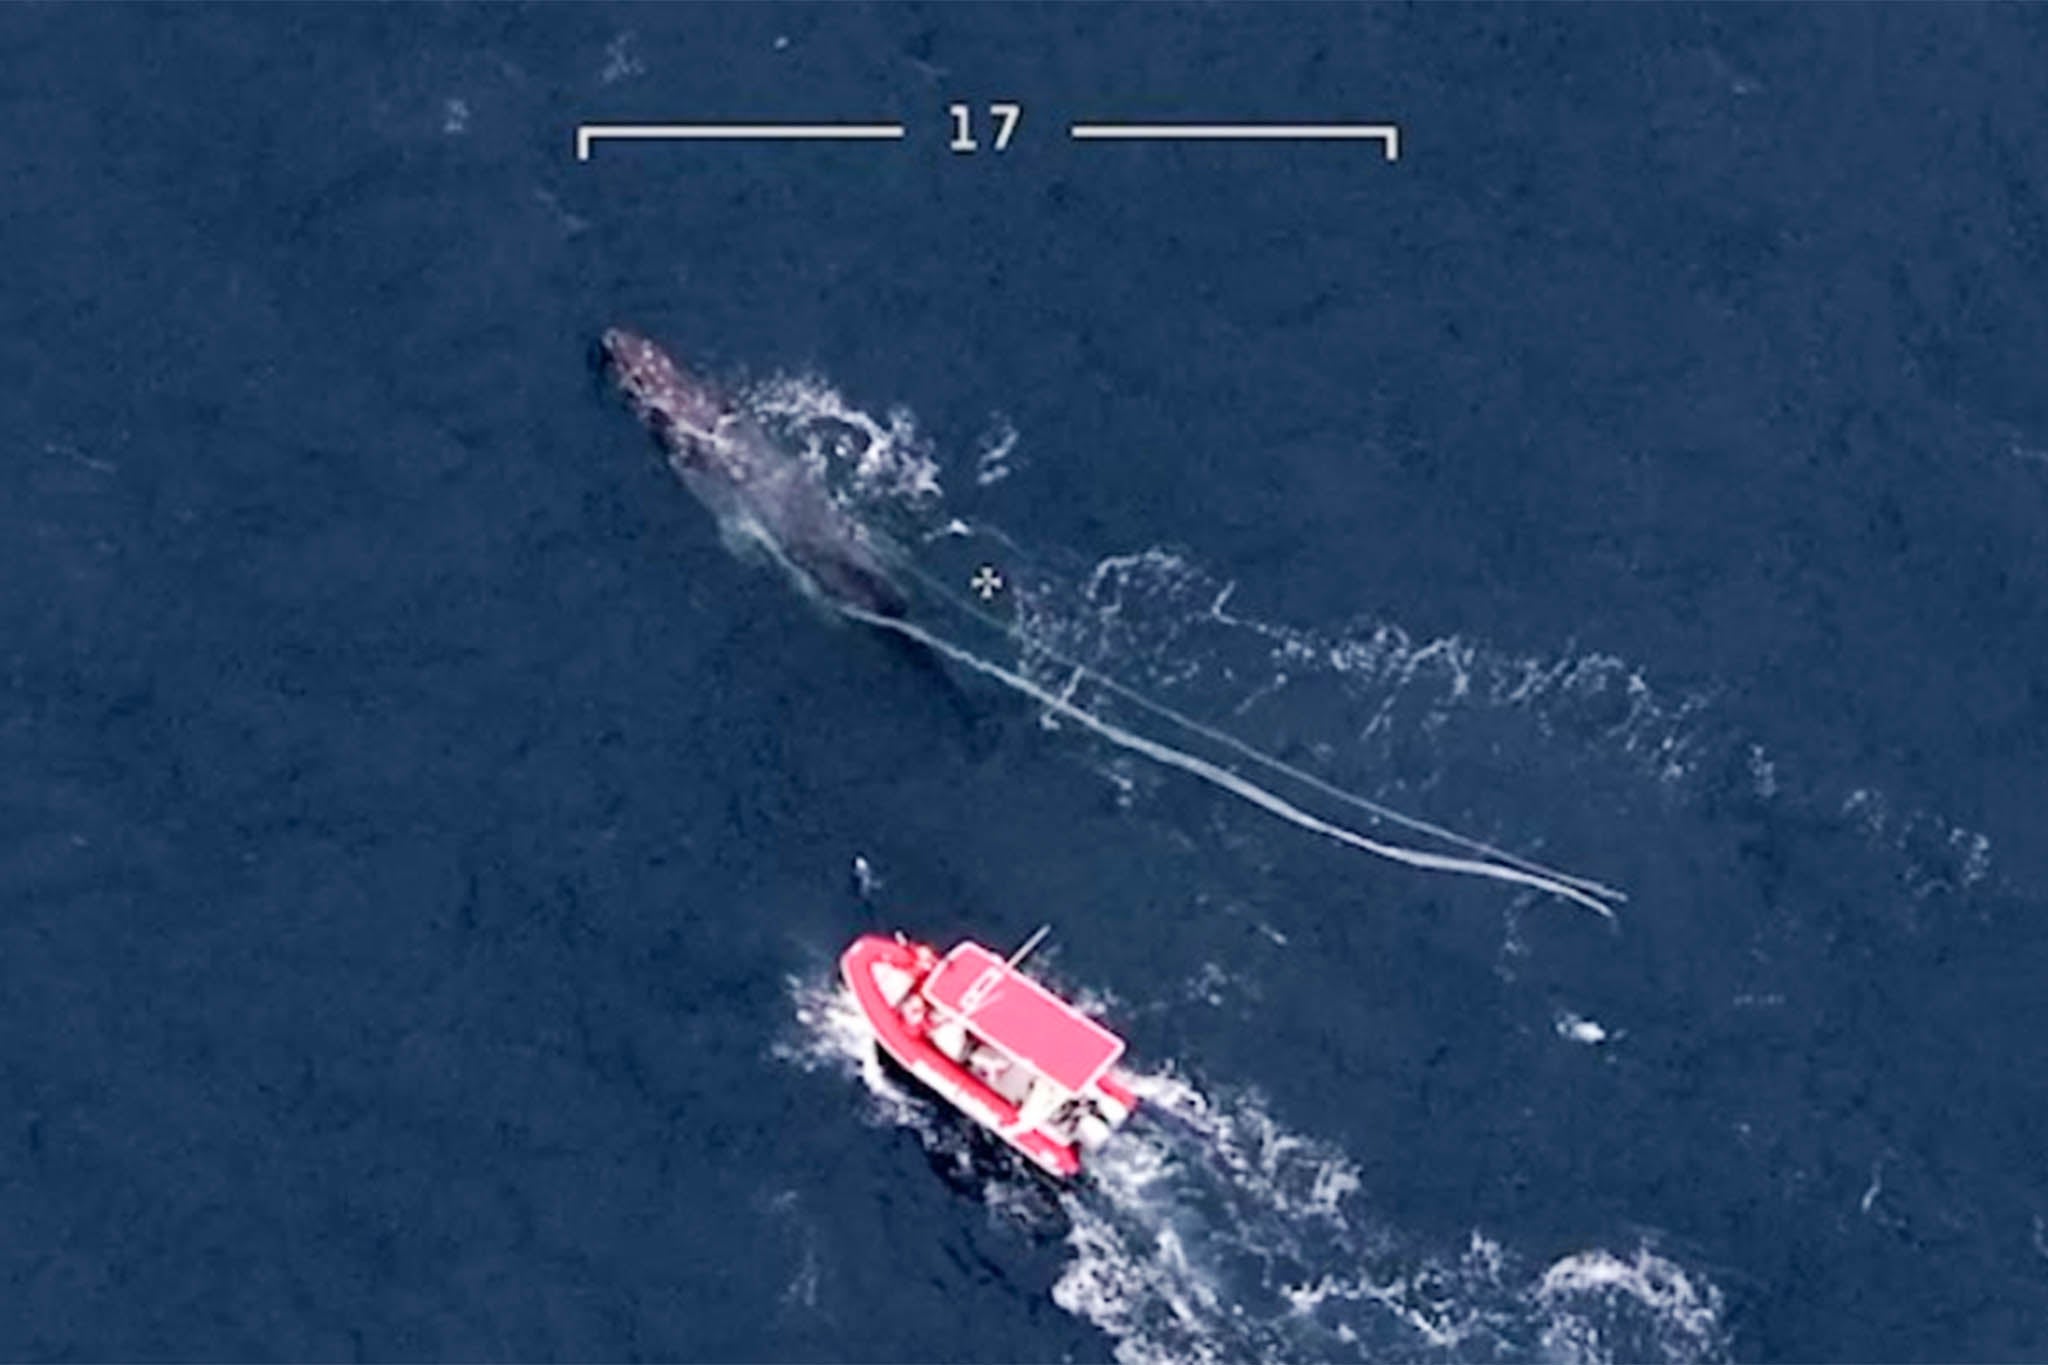 A rescue operation helped the whale return to safety